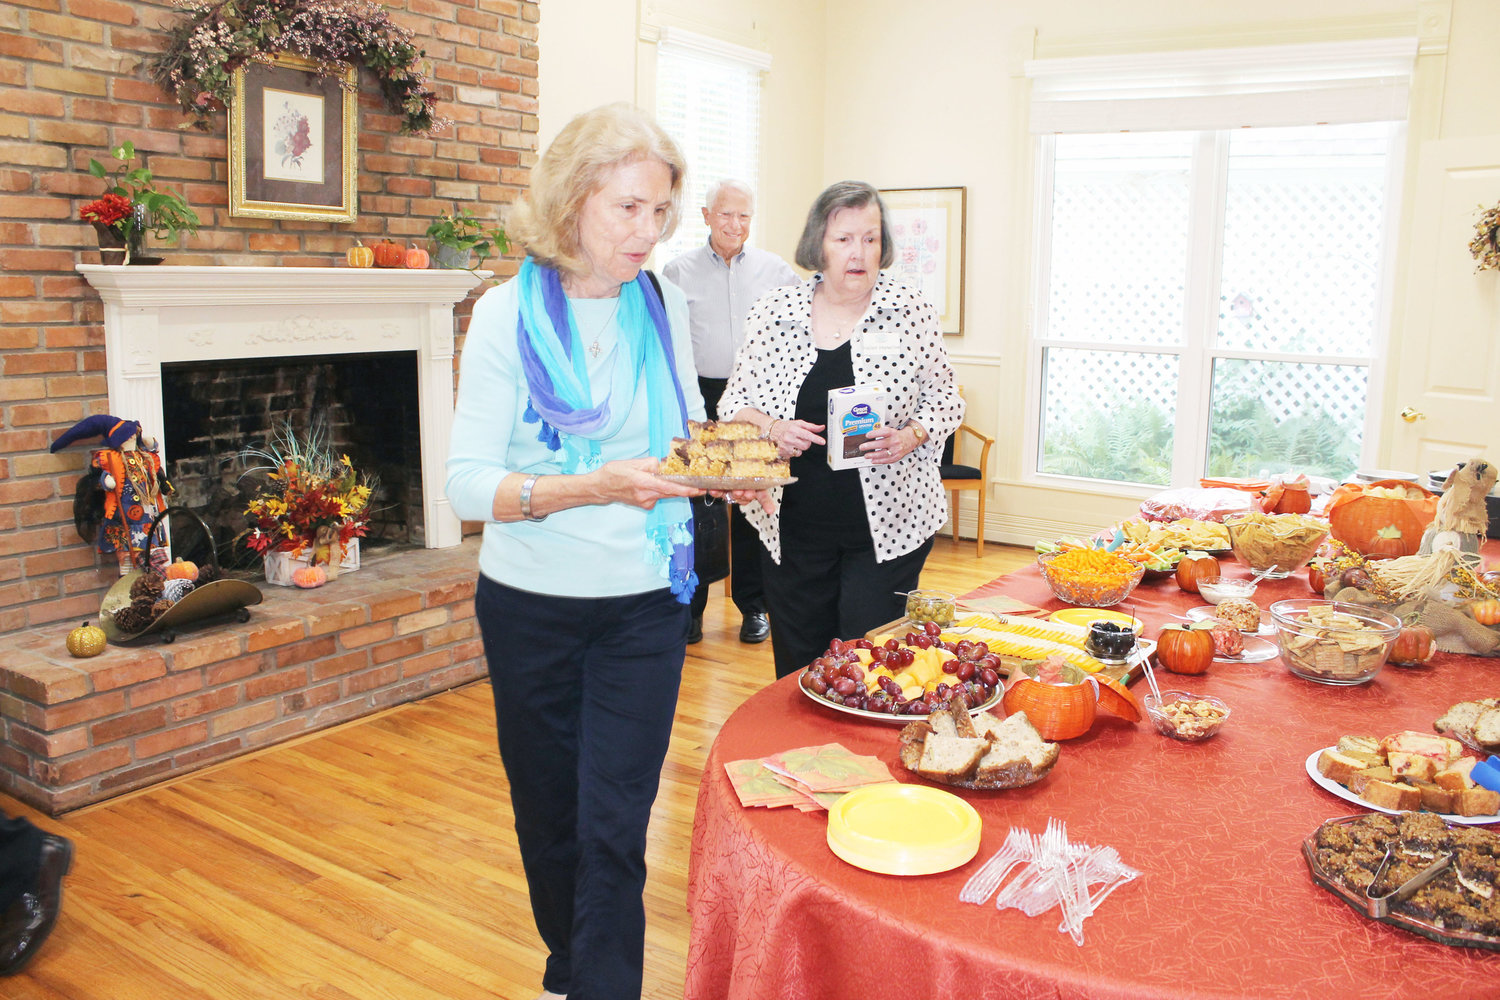 The staff and volunteers at Grace Healthcare Ministry were happy to show off renovations from the past year at Tuesday's chamber mixer open house. Marilyn Brown (wife of Grace Healthcare Board President Warren Brown seen in the background) and Helen Haneline look for room on the table for more goodies. (Monitor photo by Doris Newman)